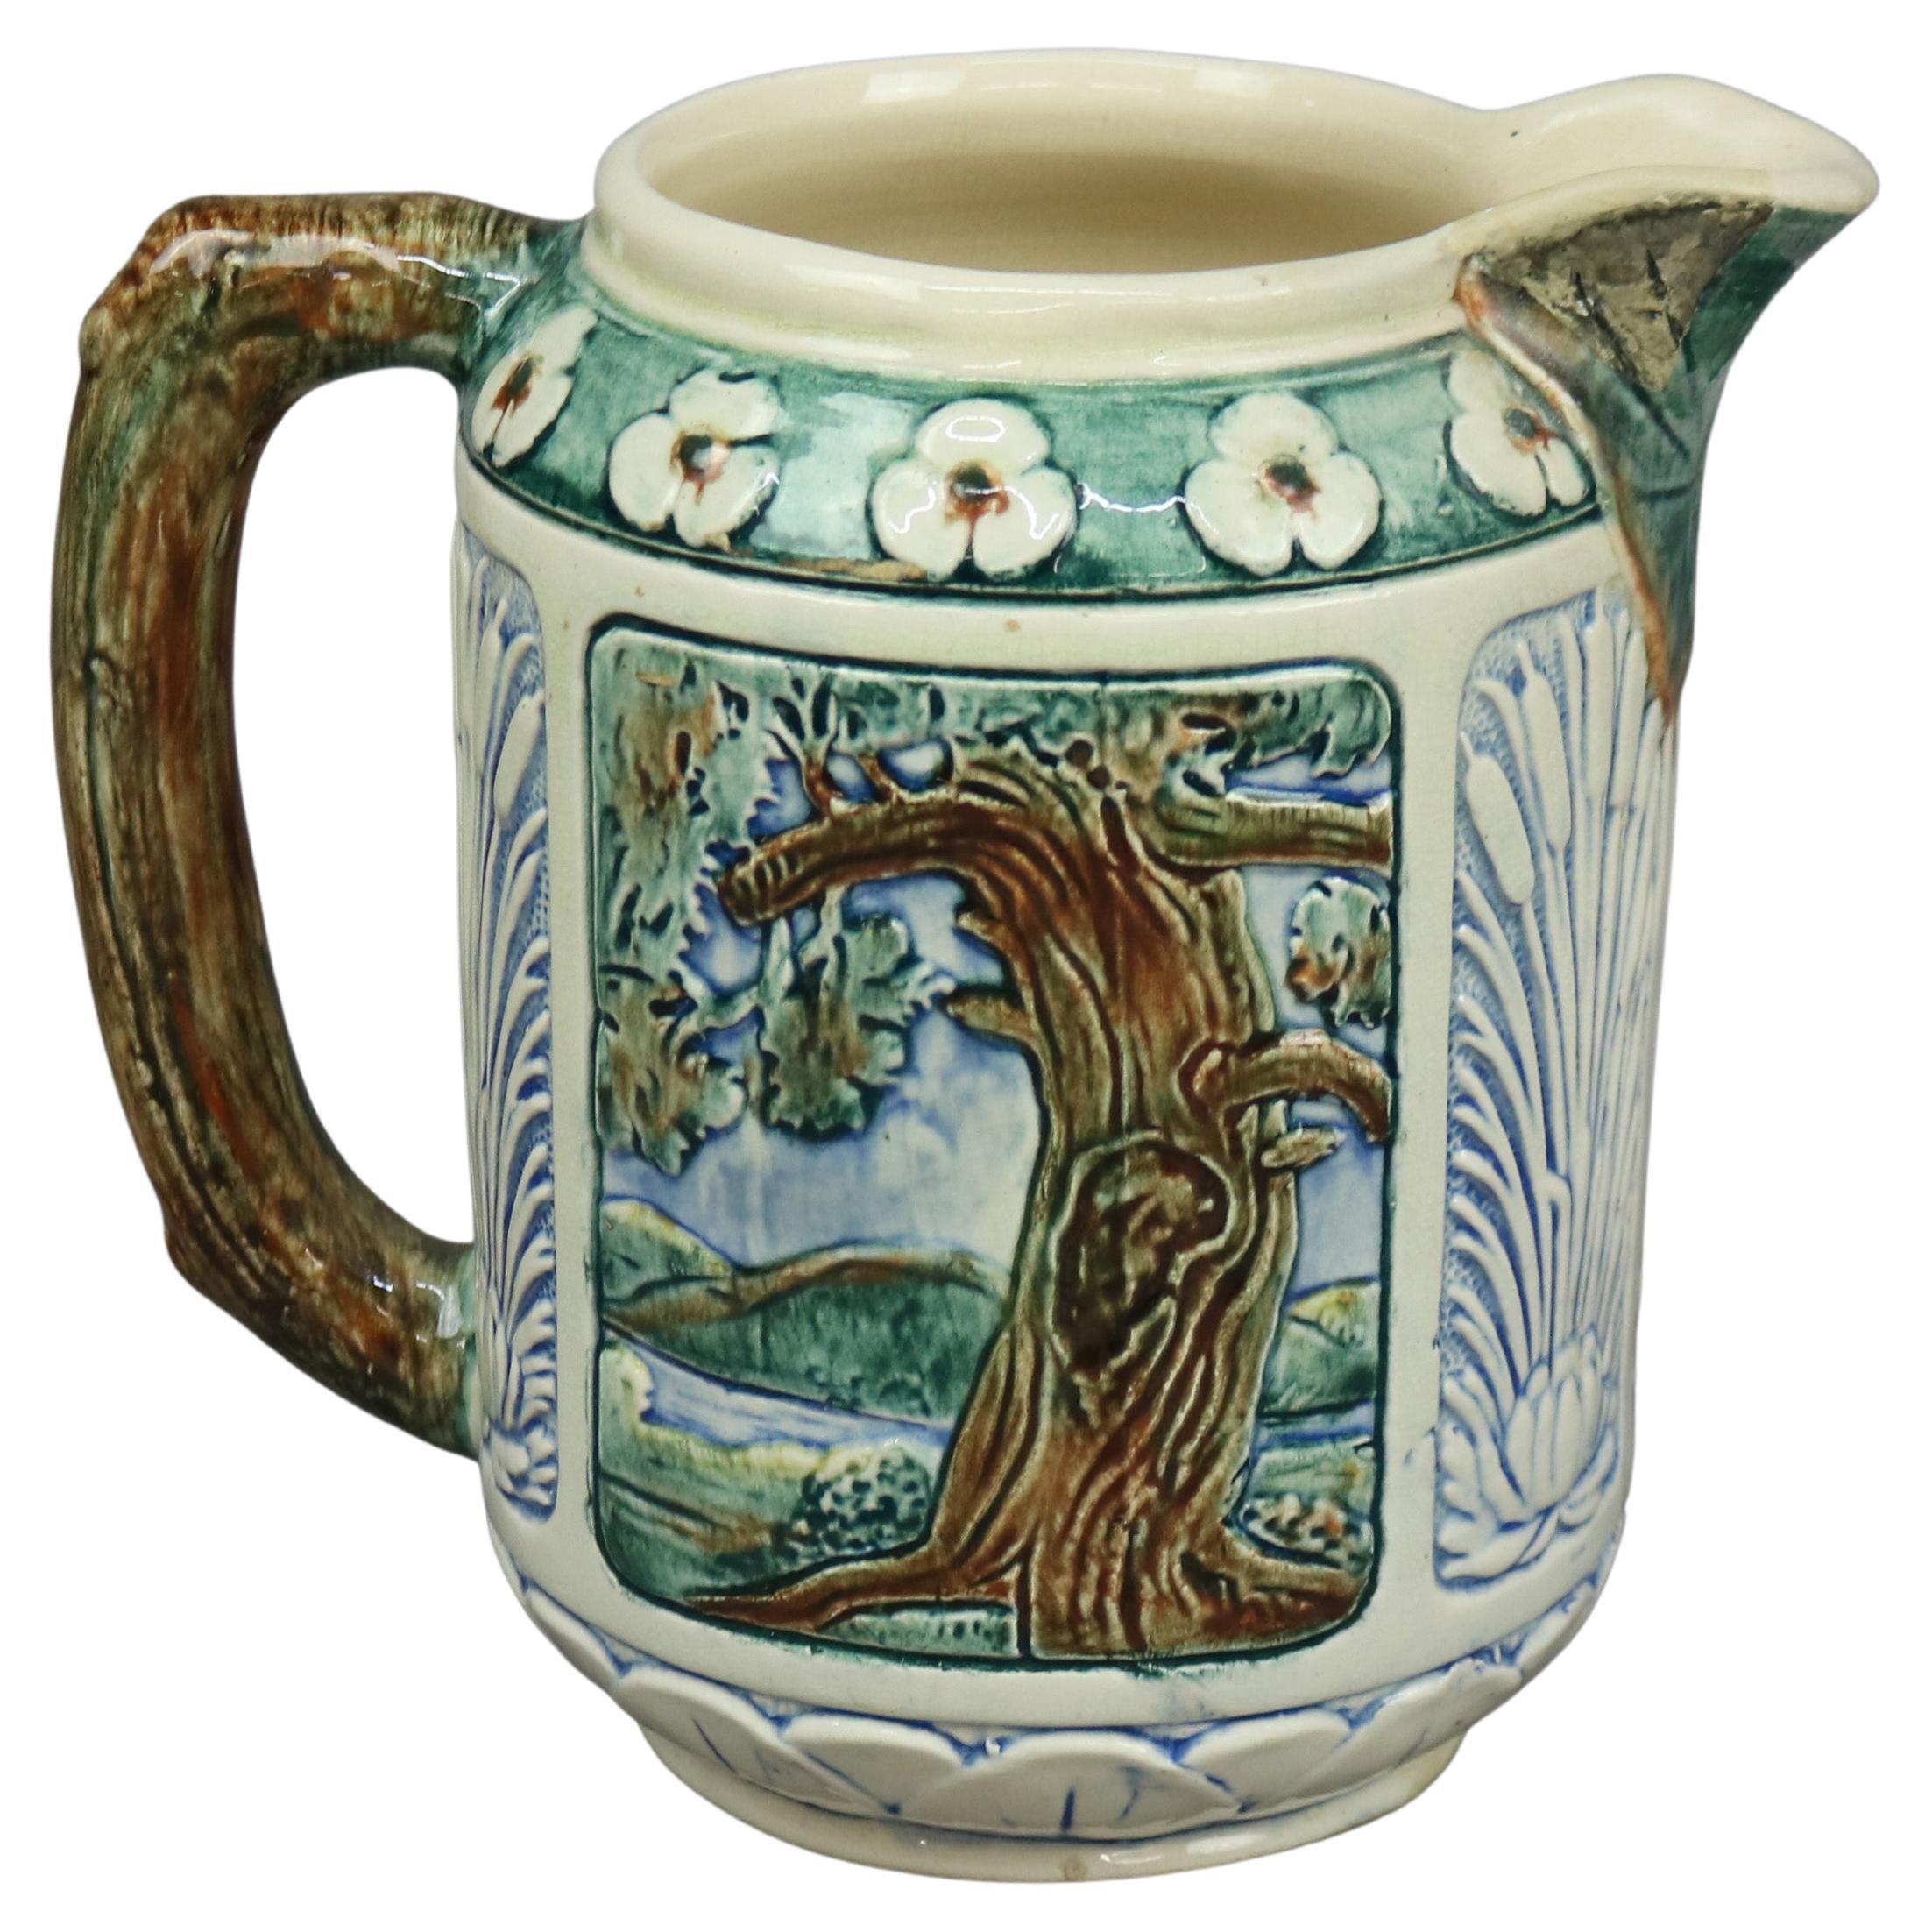 An antique pitcher by Weller offers art pottery construction with reserves having king fisher bird and tree in woodland setting, stick form handle and stylized flowers, signed on base as photographed, c 1930

Measures - 8.5''H x 5.75''W x 8.75''D.